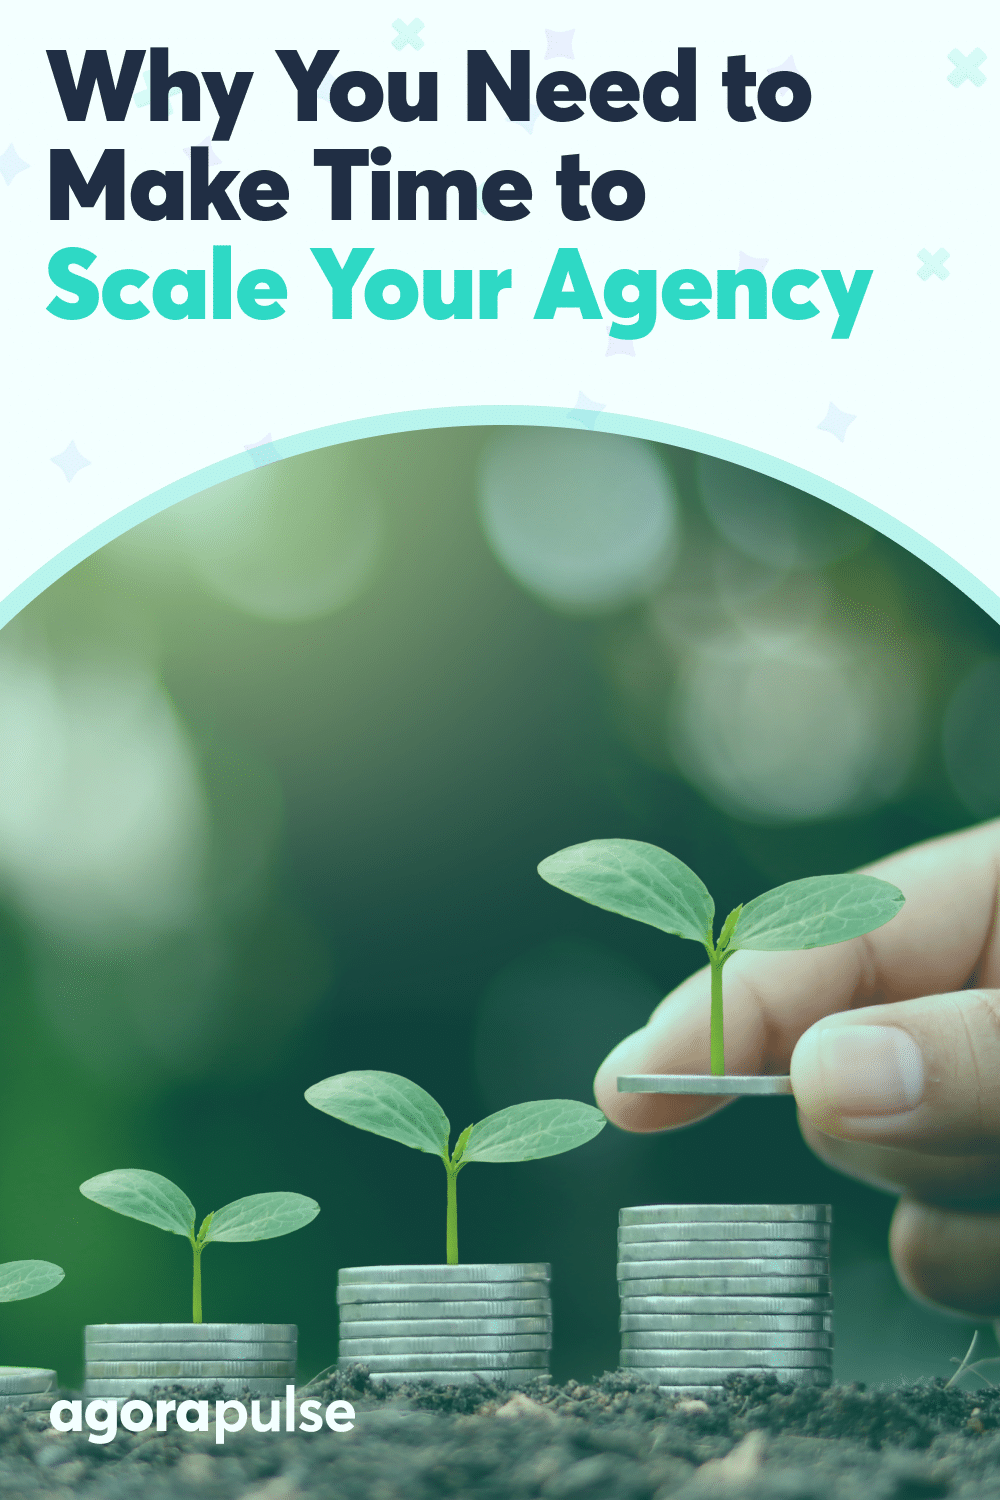 How to Scale Your Agency